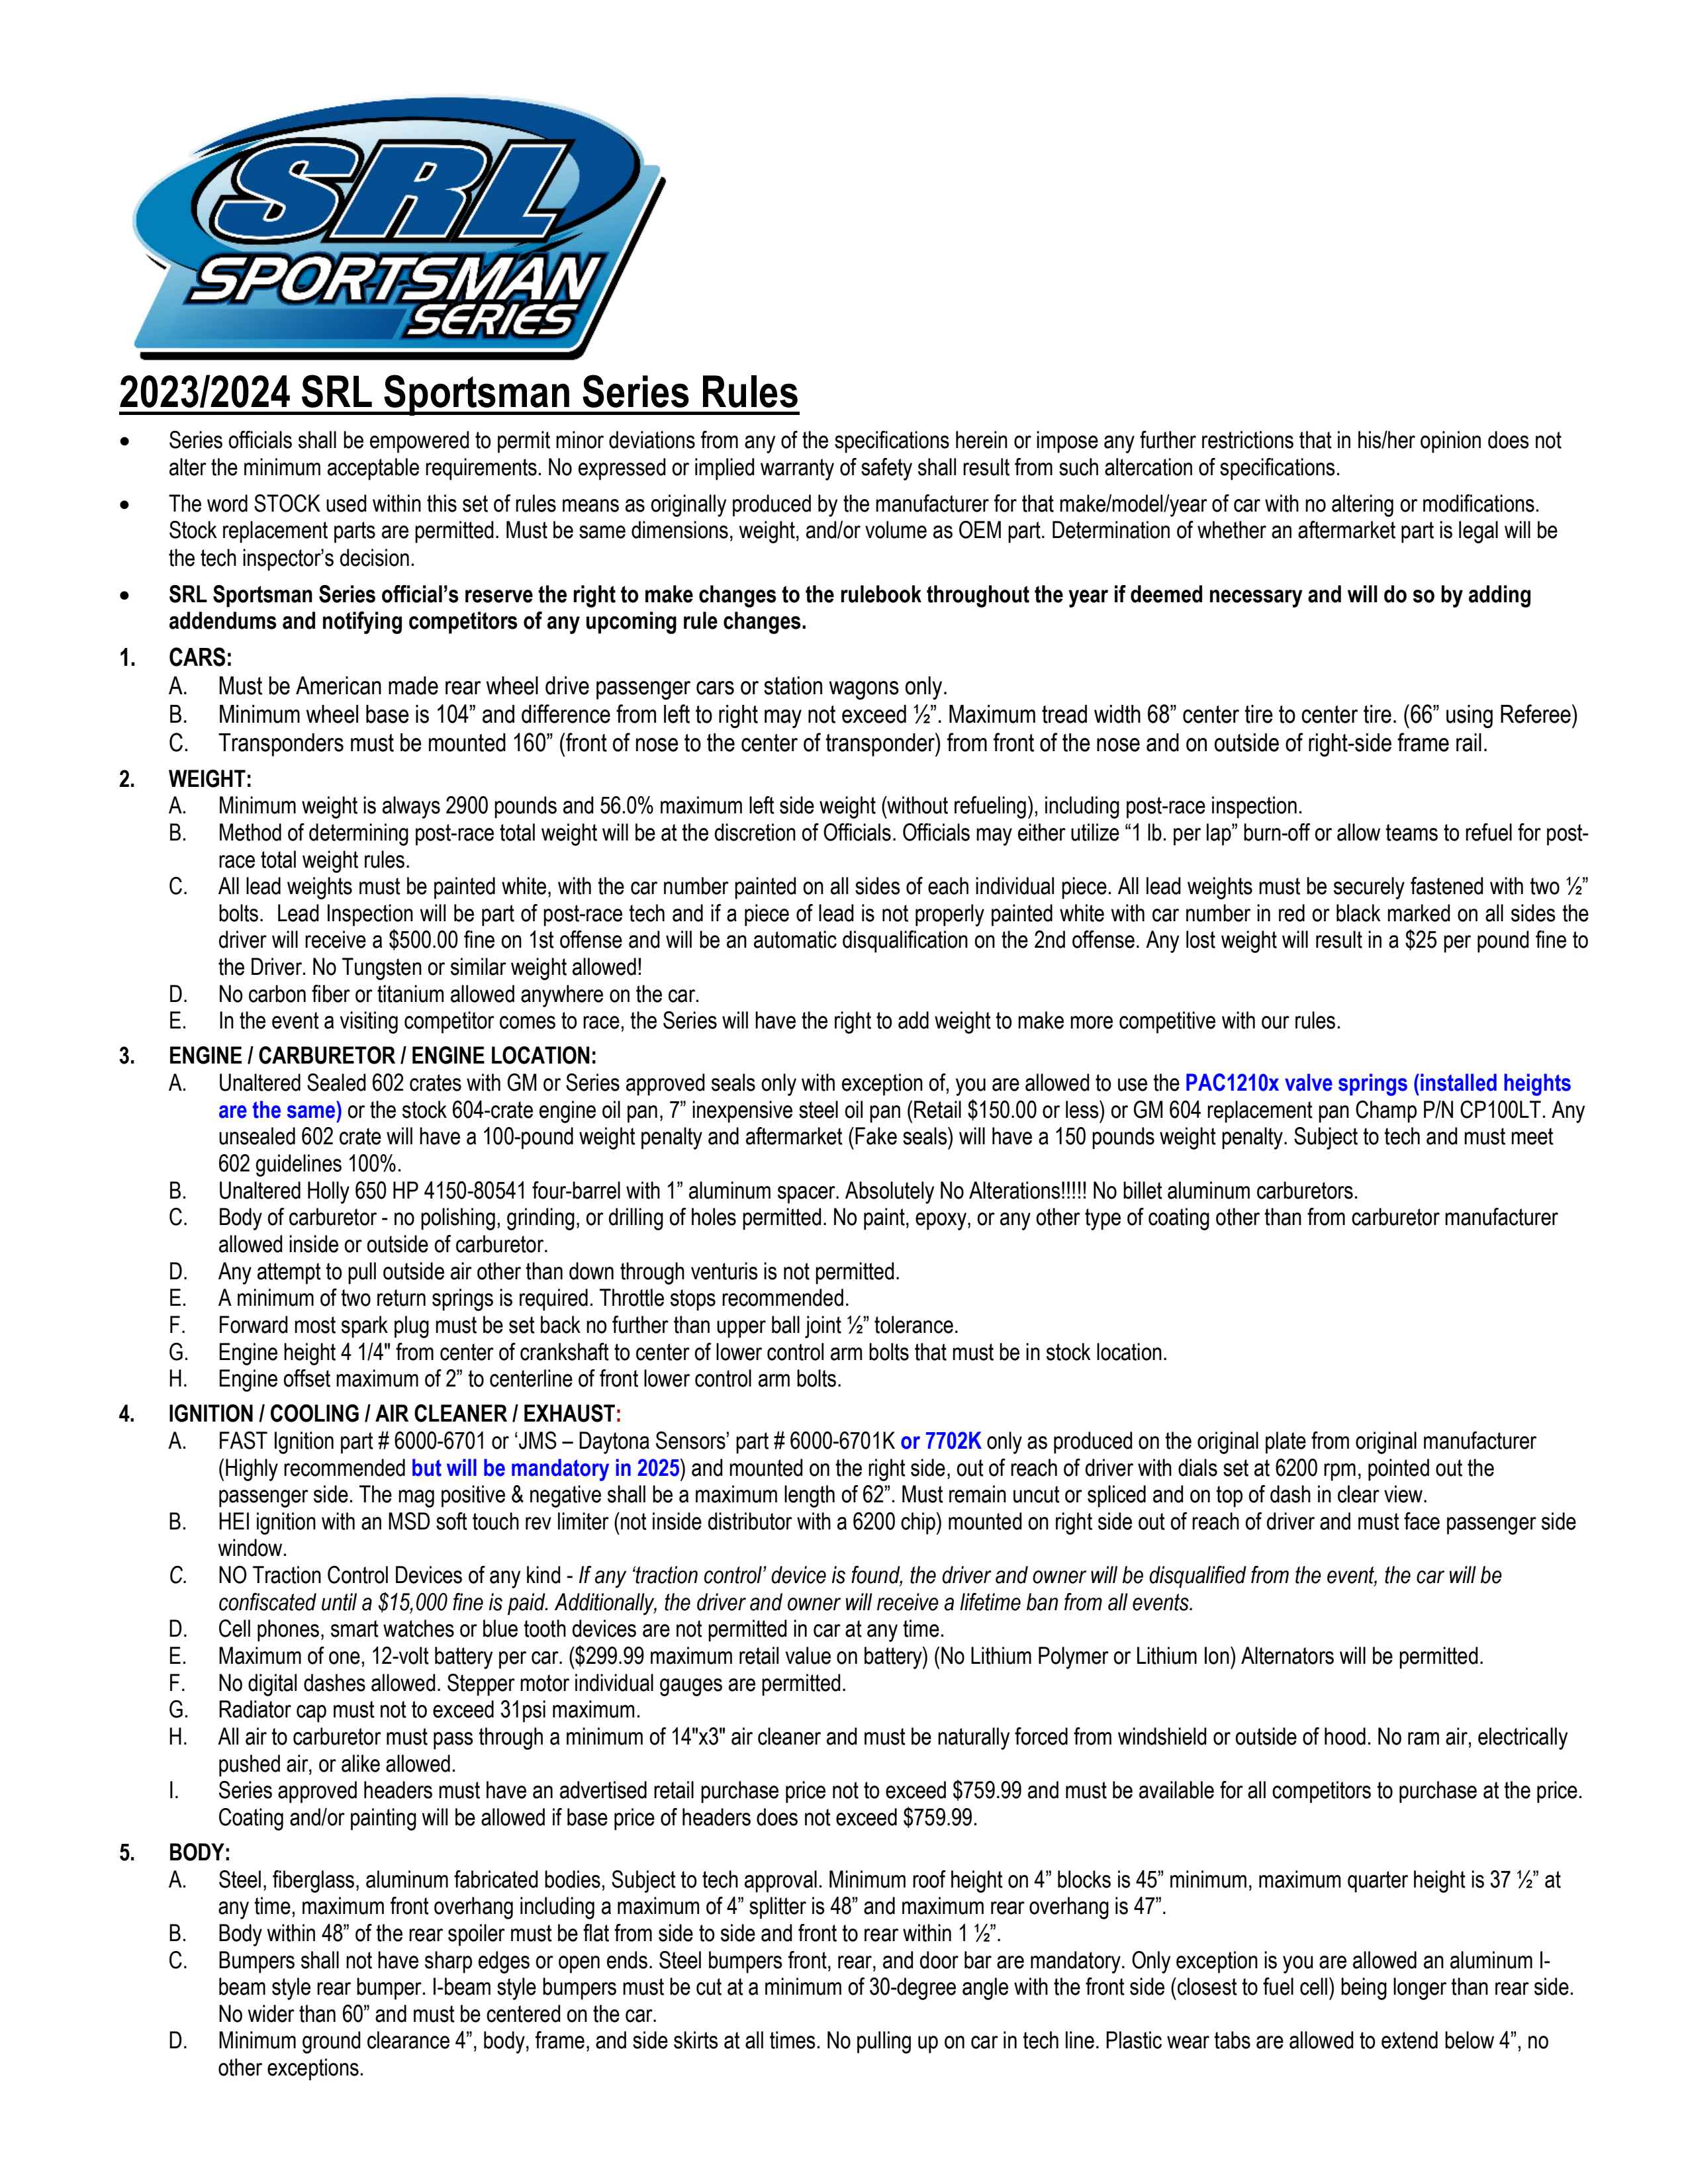 SRL Sportsman Series Rules - Page 1/6